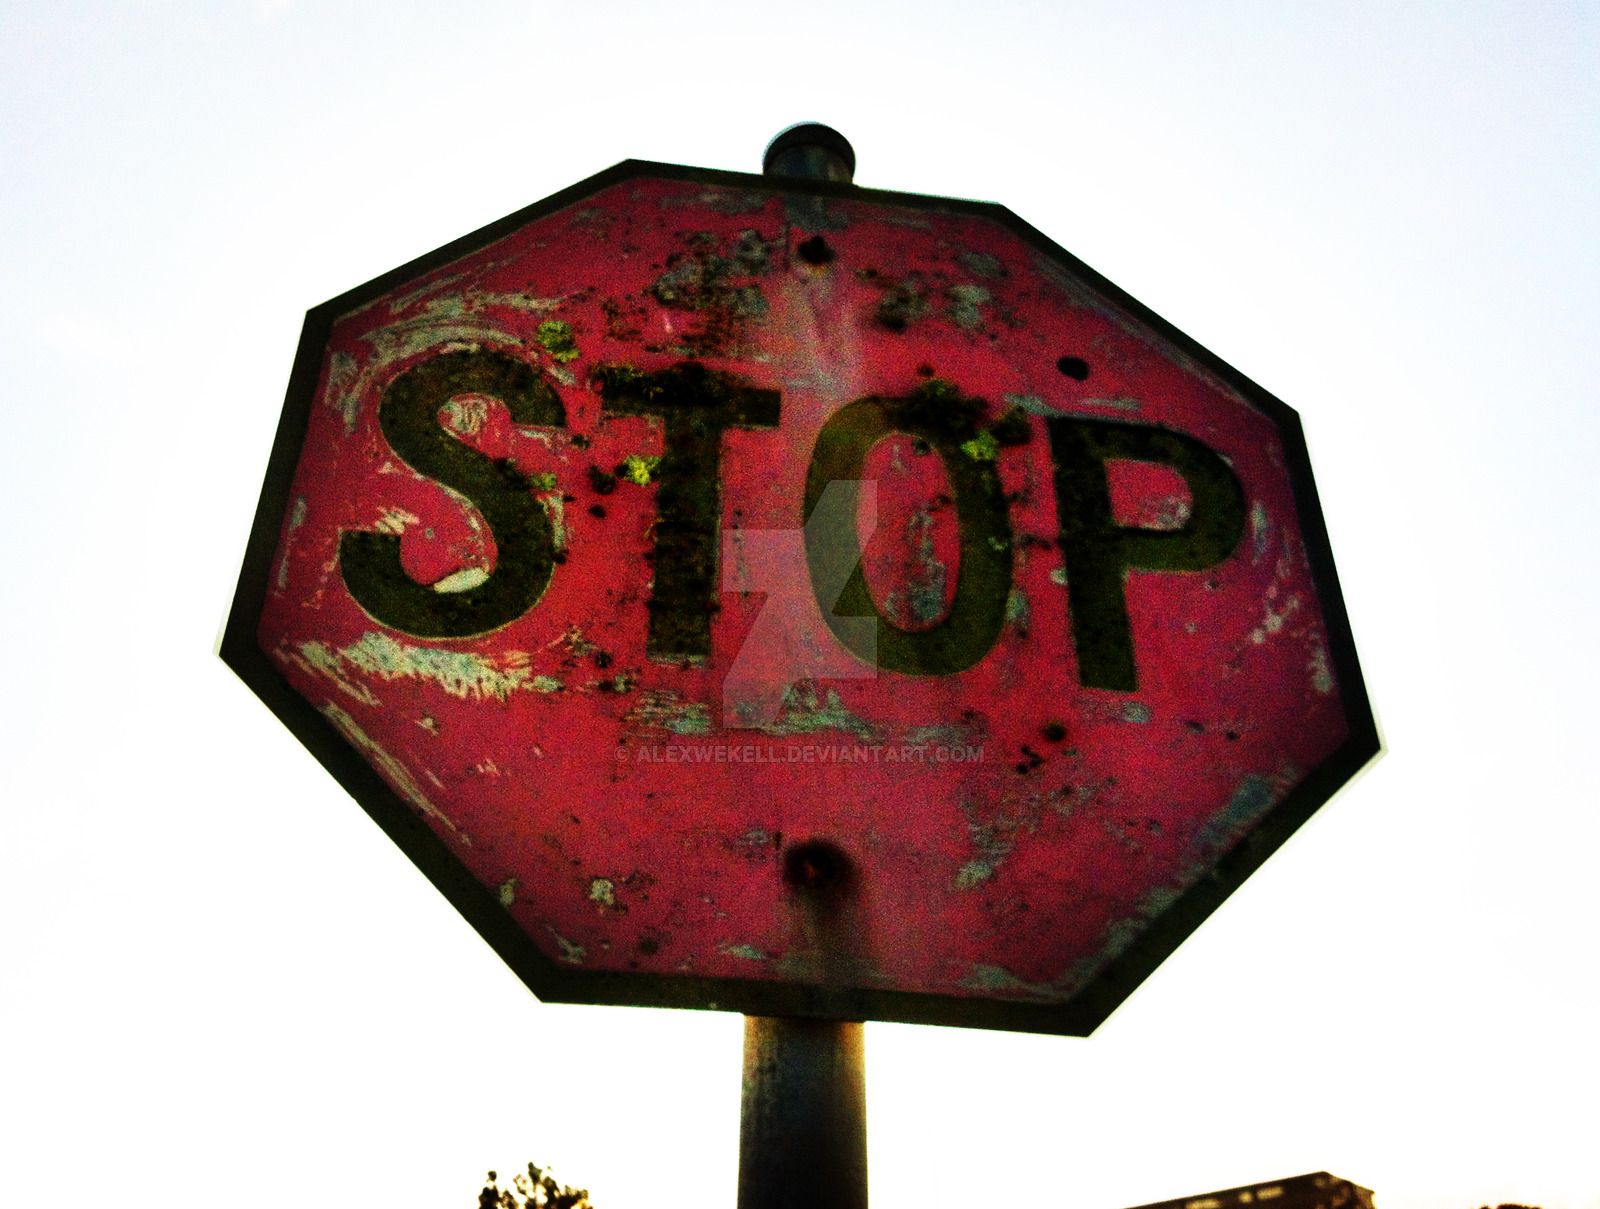 The Old Stop Sign - Project Comatose by AlexWekell on DeviantArt